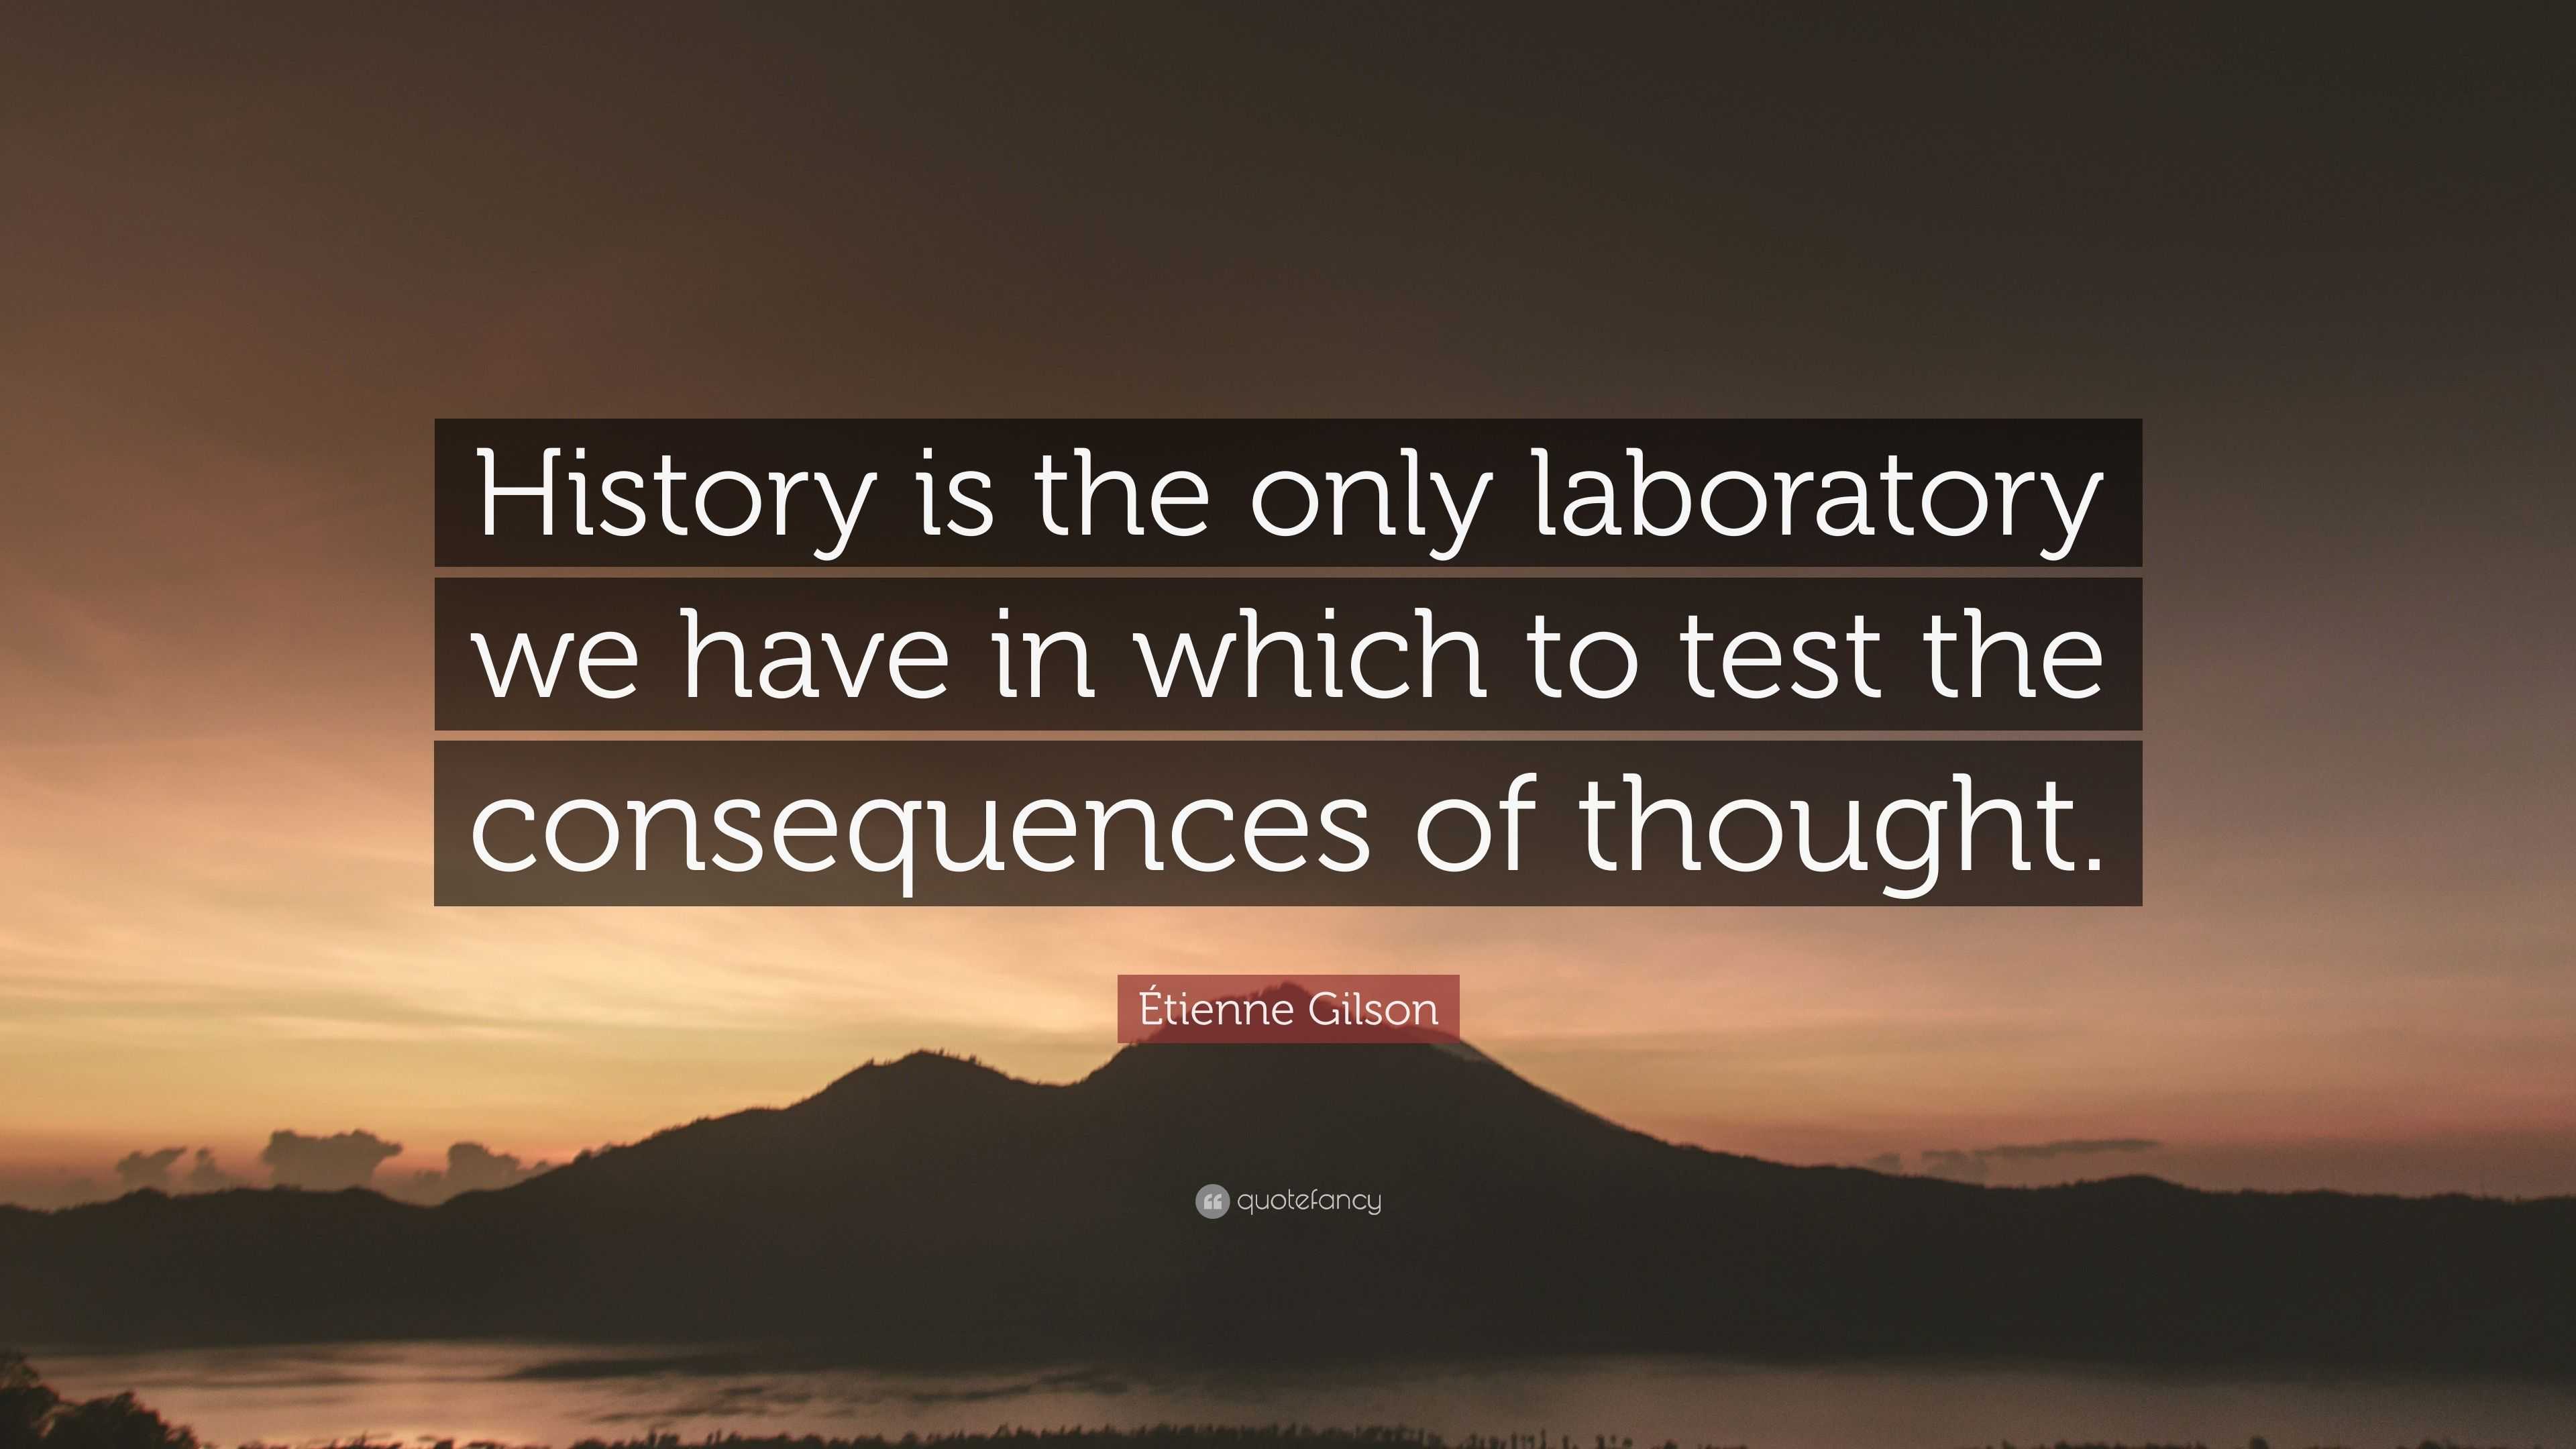 Étienne Gilson Quote: “History is the only laboratory we have in which ...